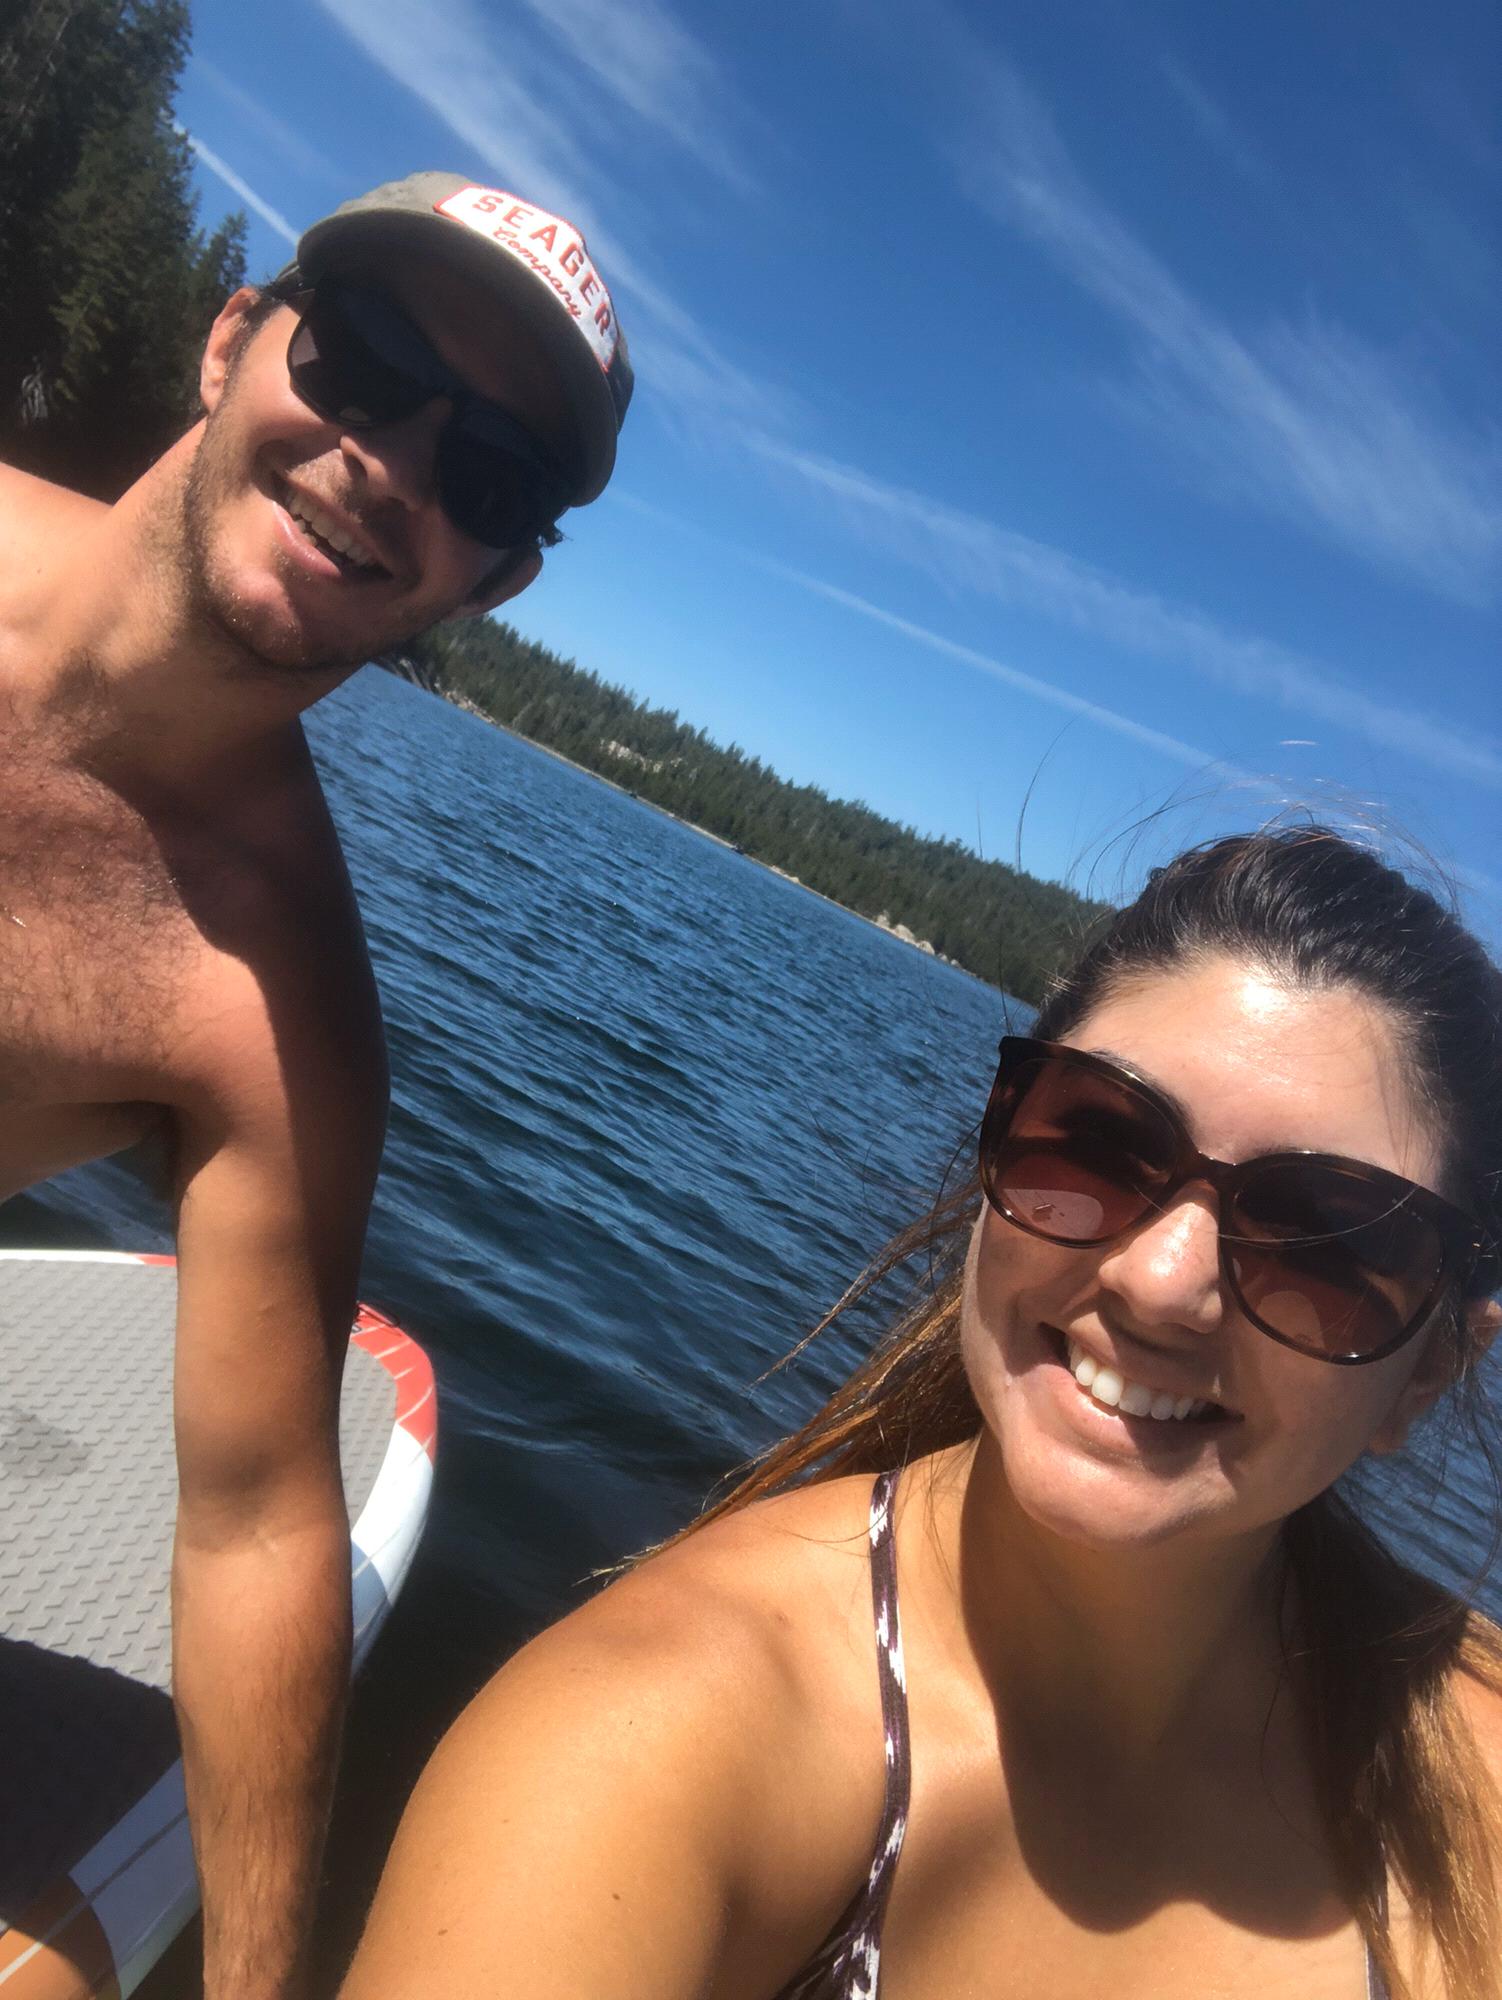 Right before Luke proposed! Lake Alpine, California. August 3rd, 2019